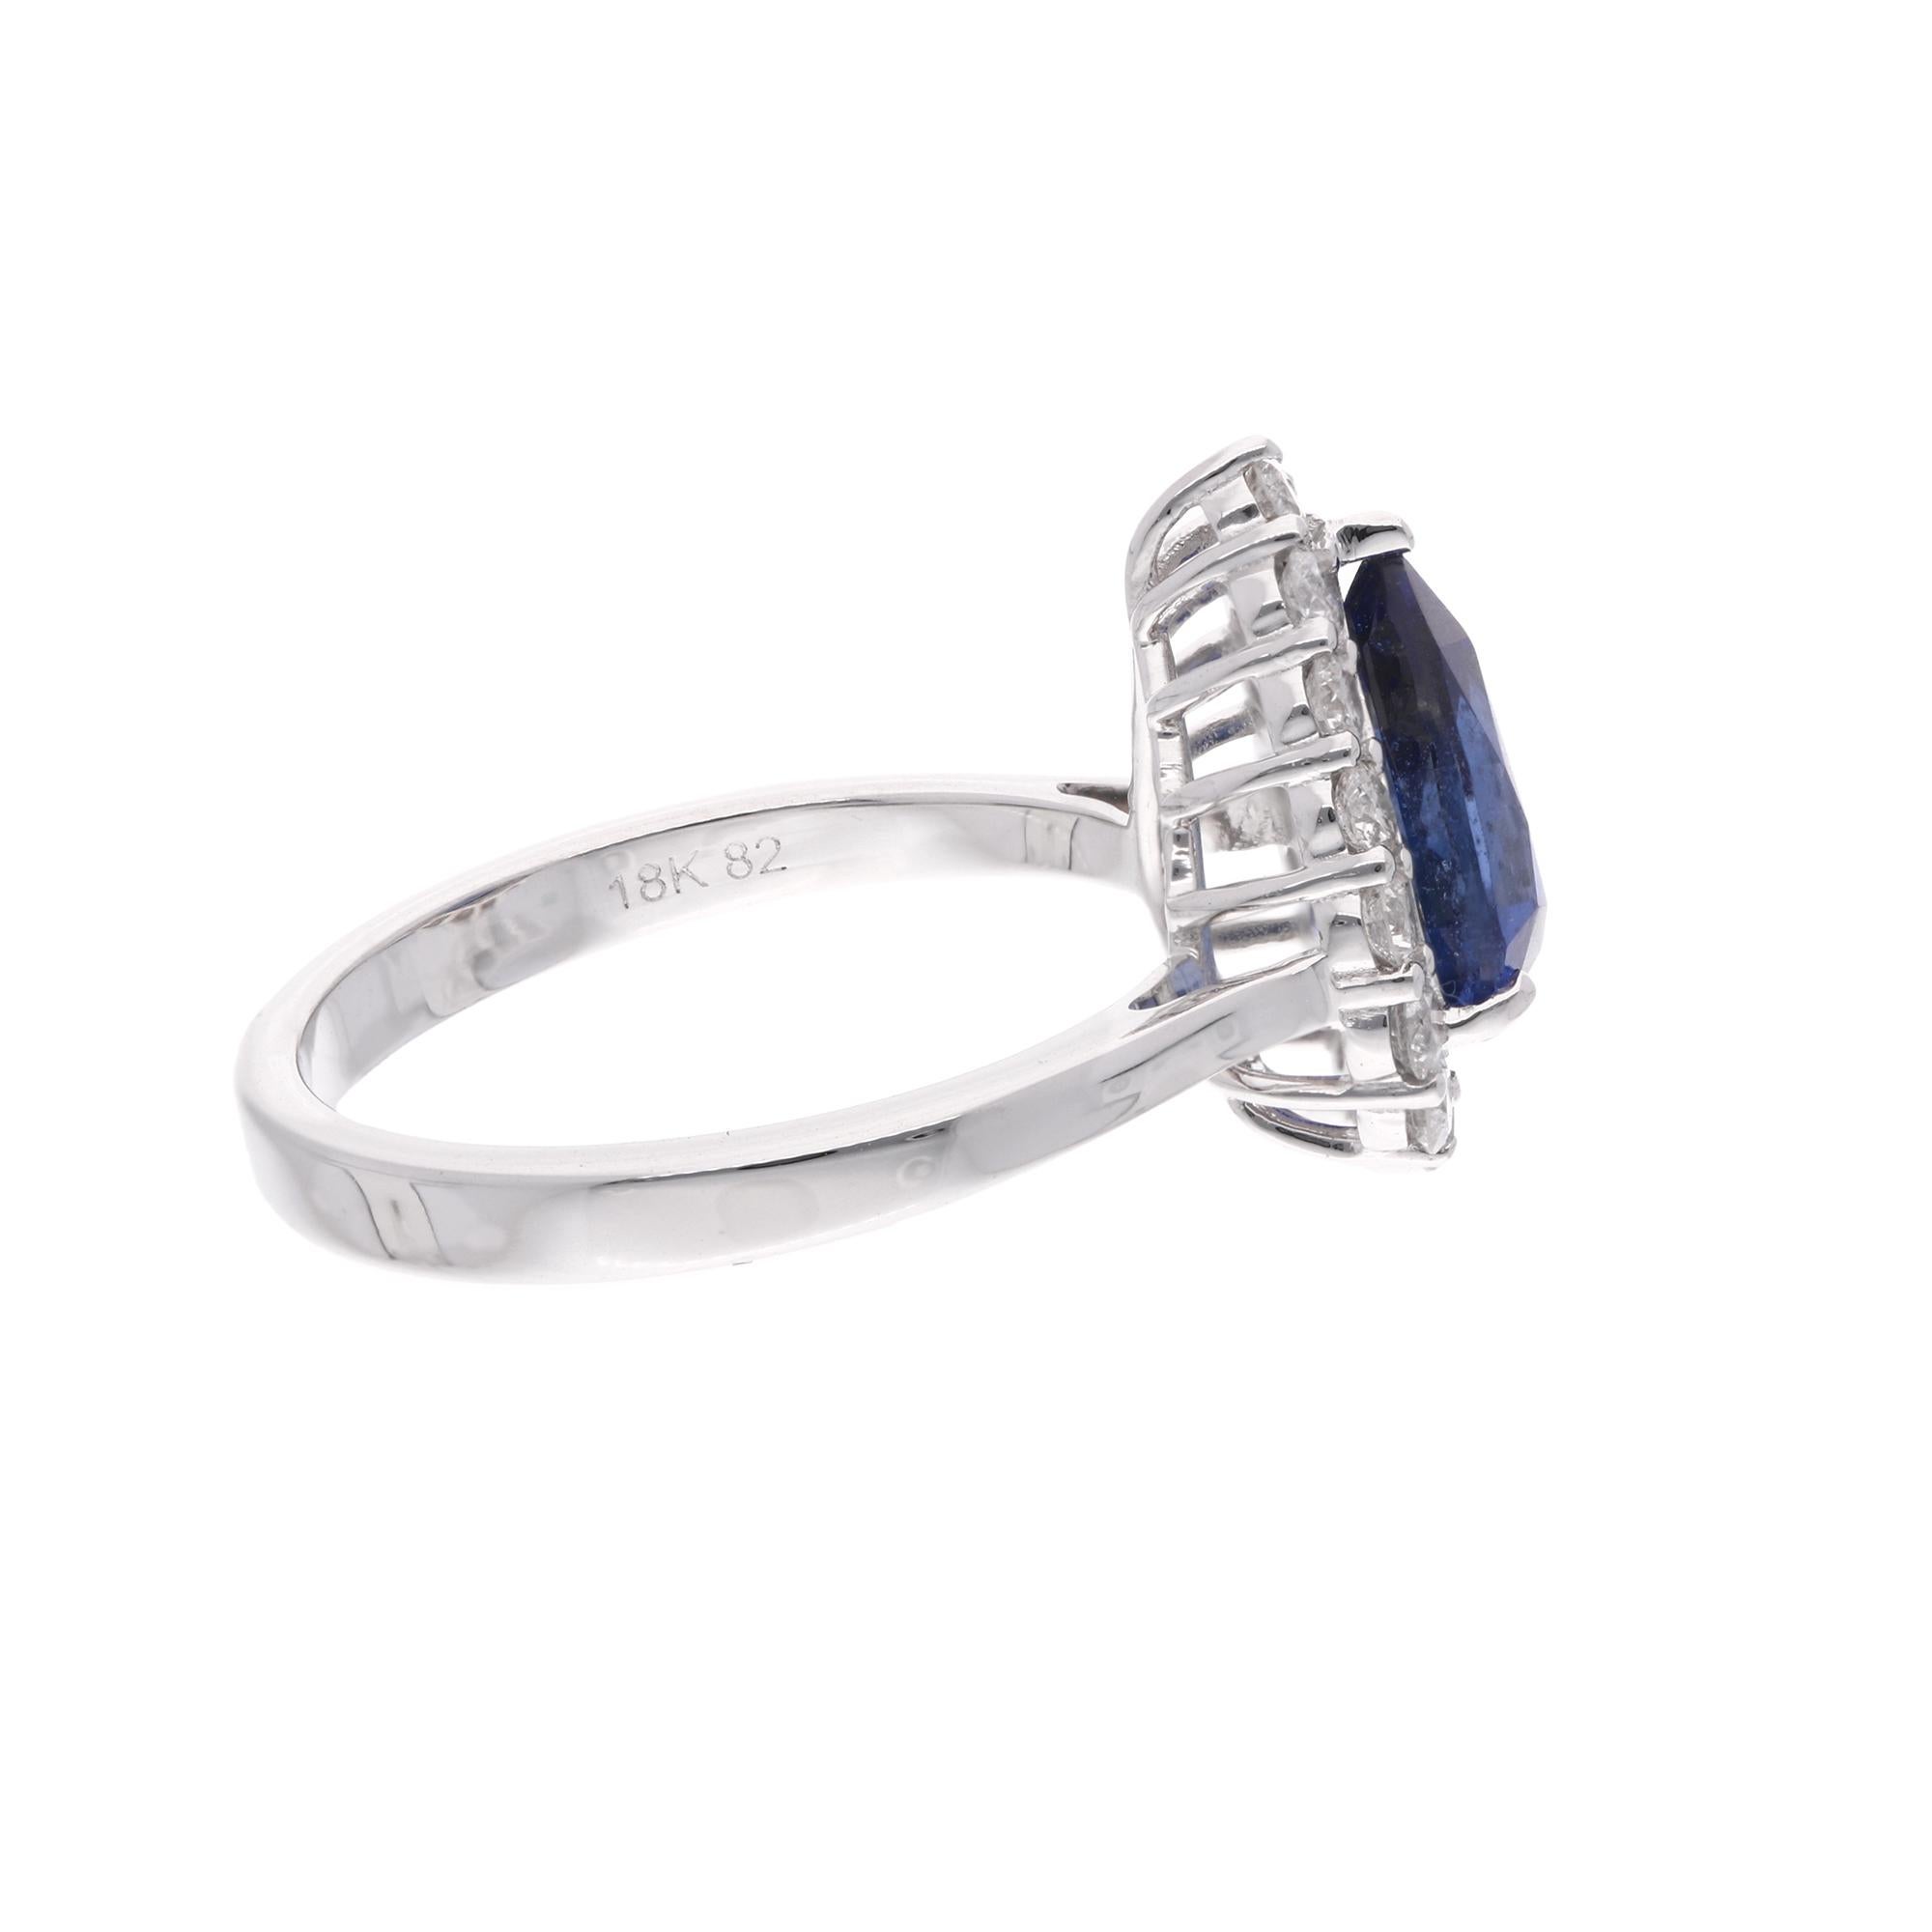 Item Code :- SER-22449
Gross Wt. :- 4.62 gm
18k White Gold Wt. :- 3.94 gm
Natural Diamond Wt. :- 0.56 Ct. ( AVERAGE DIAMOND CLARITY SI1-SI2 & COLOR H-I )
Blue Sapphire Wt. :- 2.85 Ct.
Ring Size :- 7 US & All size available

✦